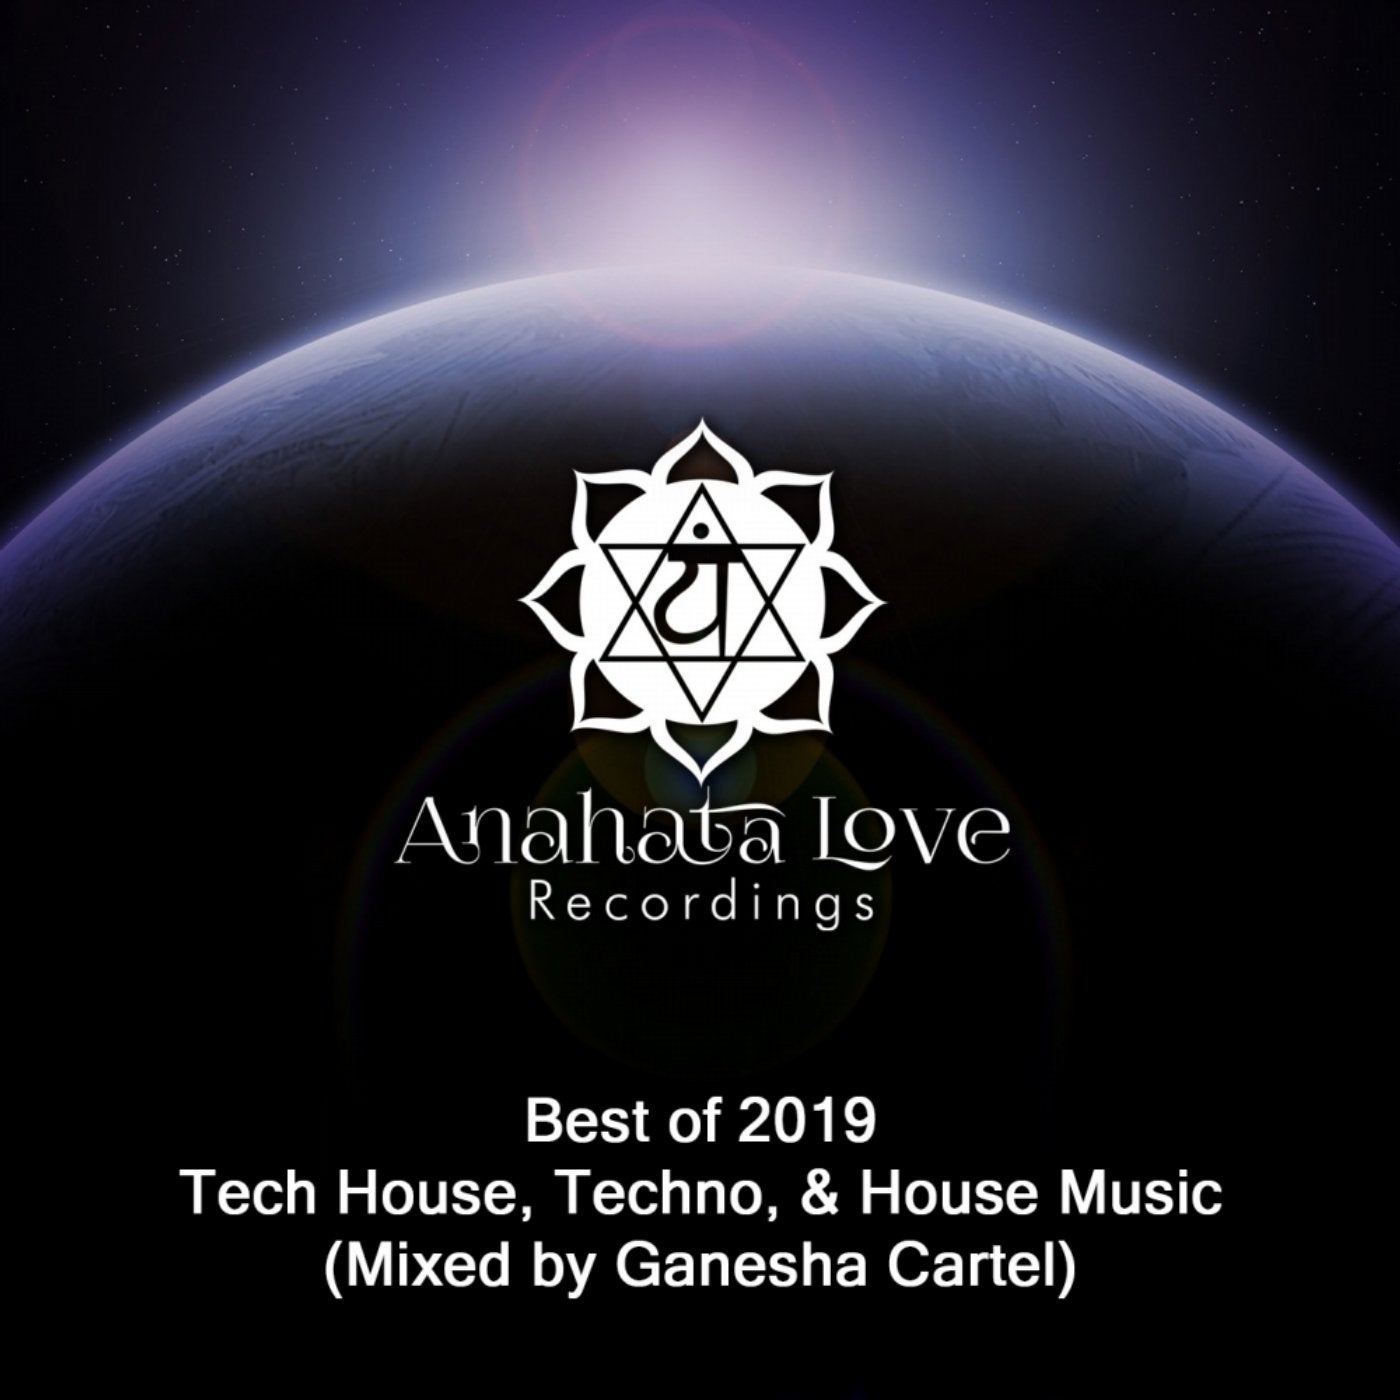 Best of 2019 Tech House, Techno, & House Music (Mixed by Ganesha Cartel)